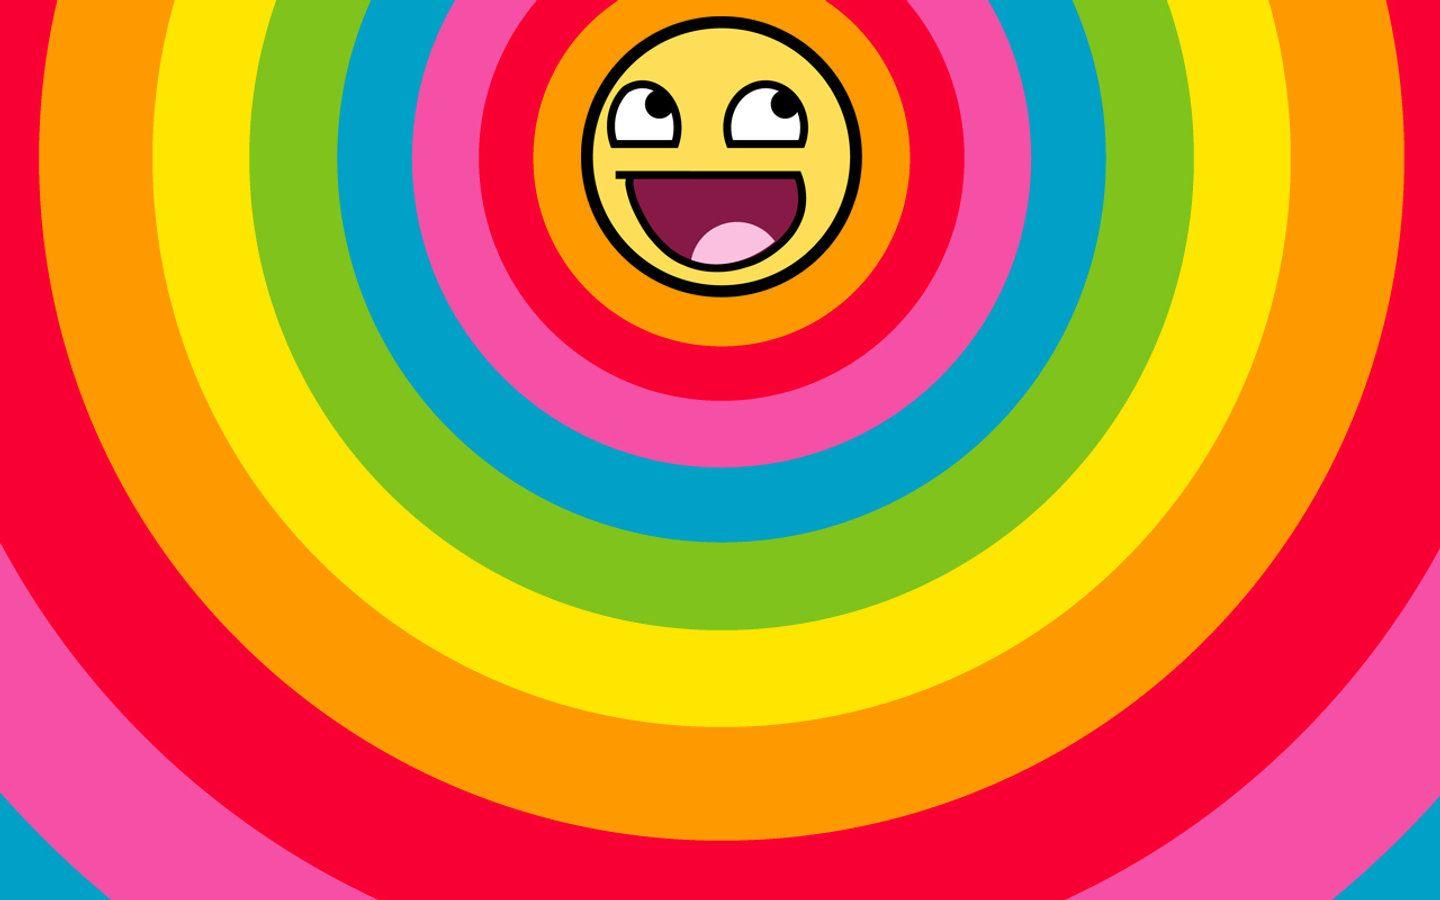 Awesome Rainbow Wallpapers - Top Free Awesome Rainbow Backgrounds ...